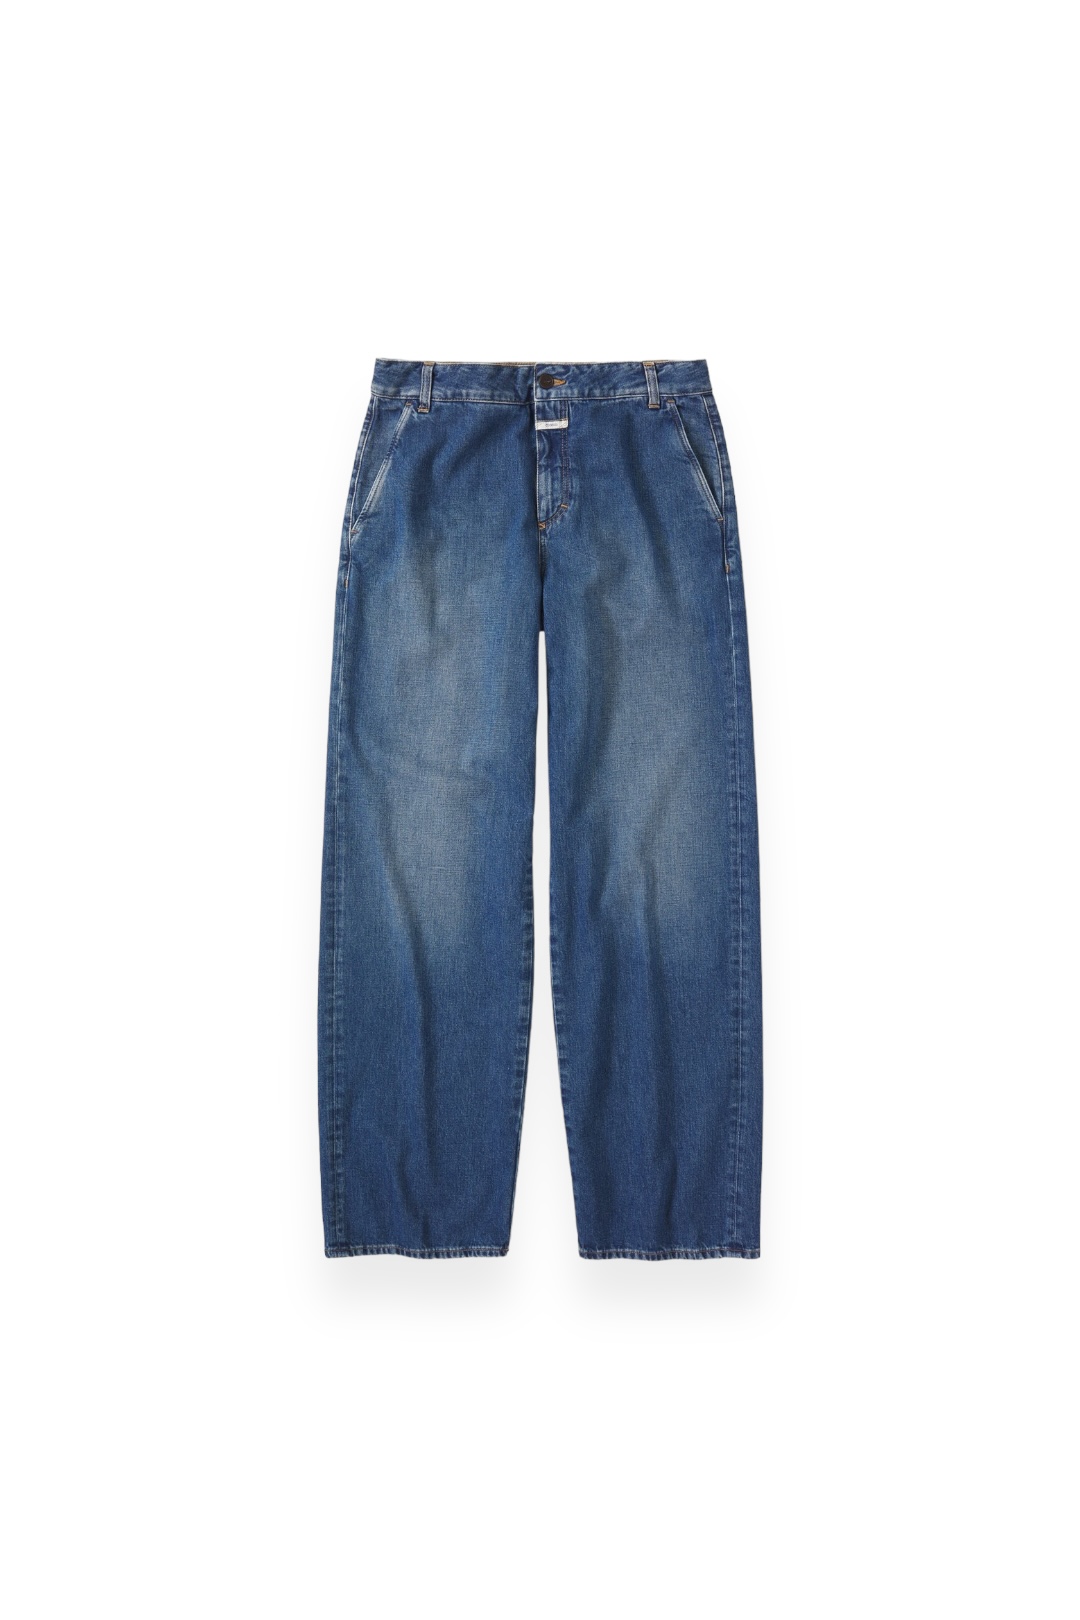 Jeans relaxed JURDY in mid blue, CLOSED, CYY354-18B-3C-DBL